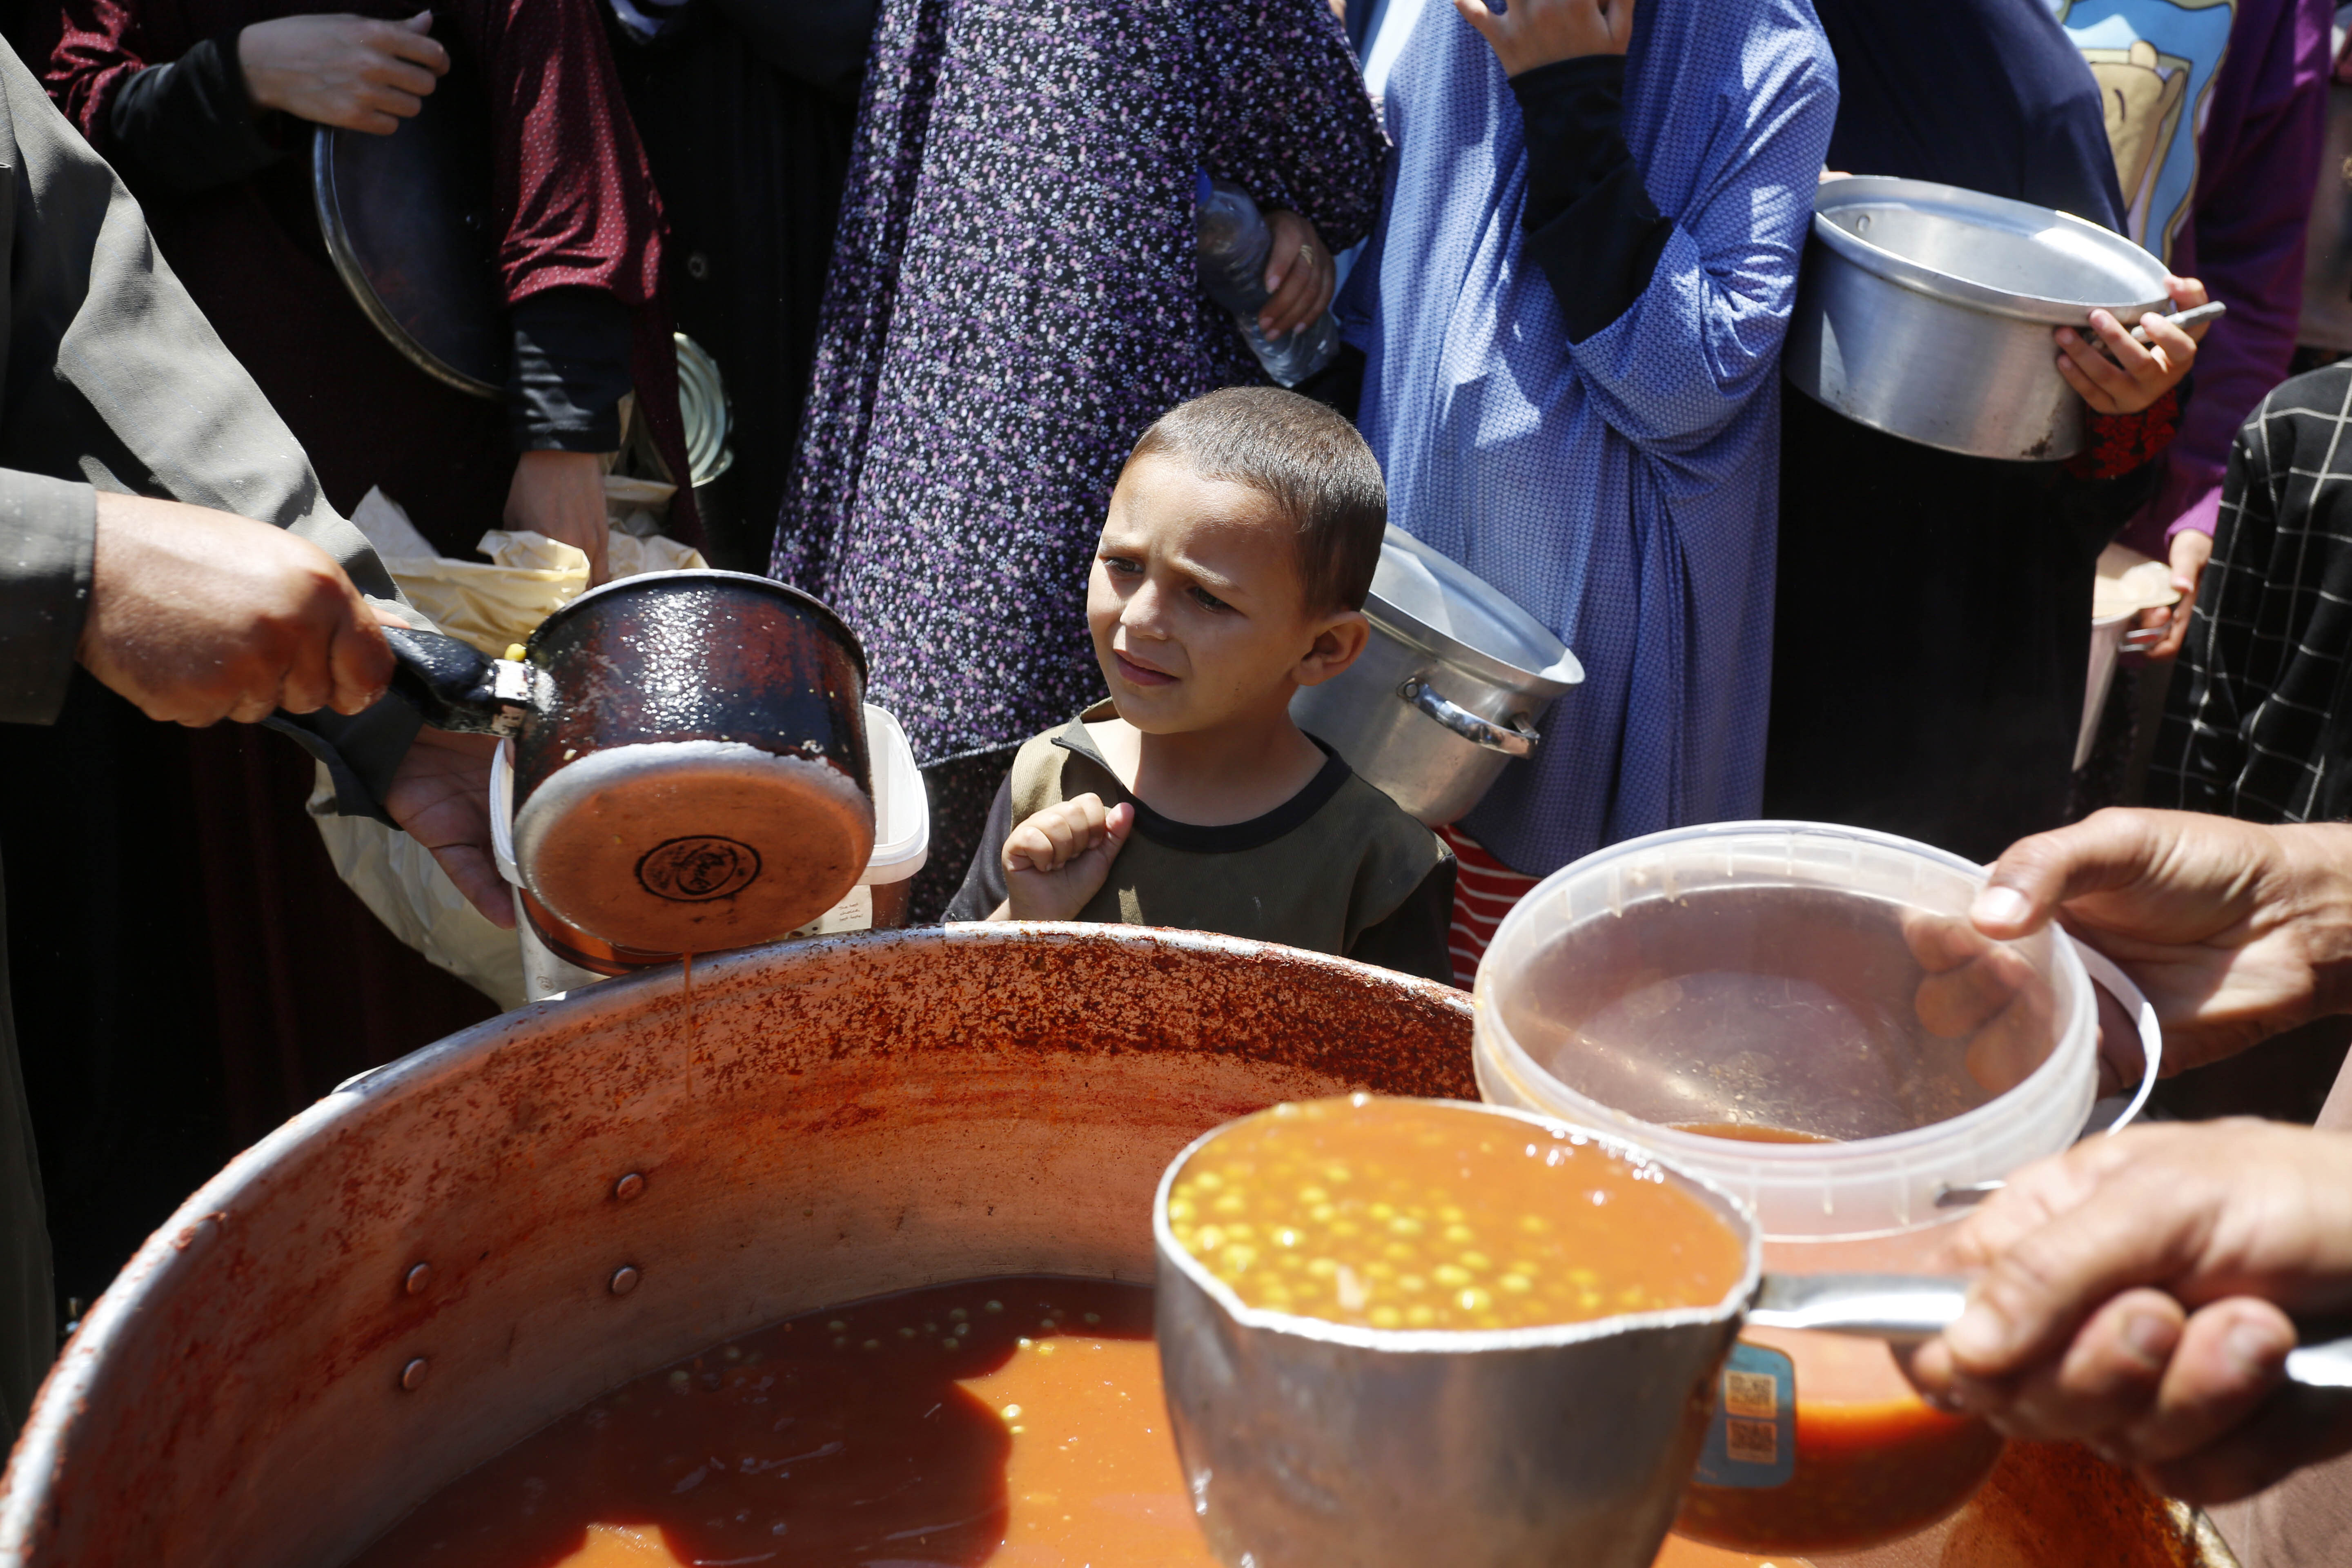 A child waits to receive a bowl of food.